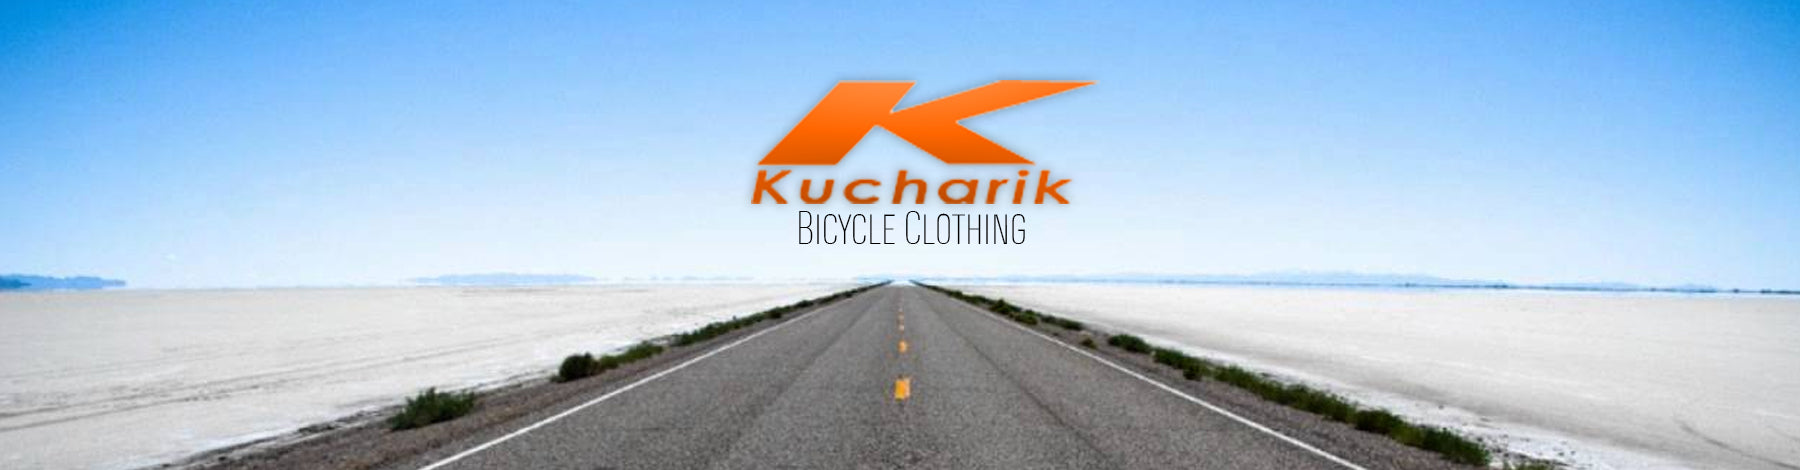 Summertime Bicycle Clothing